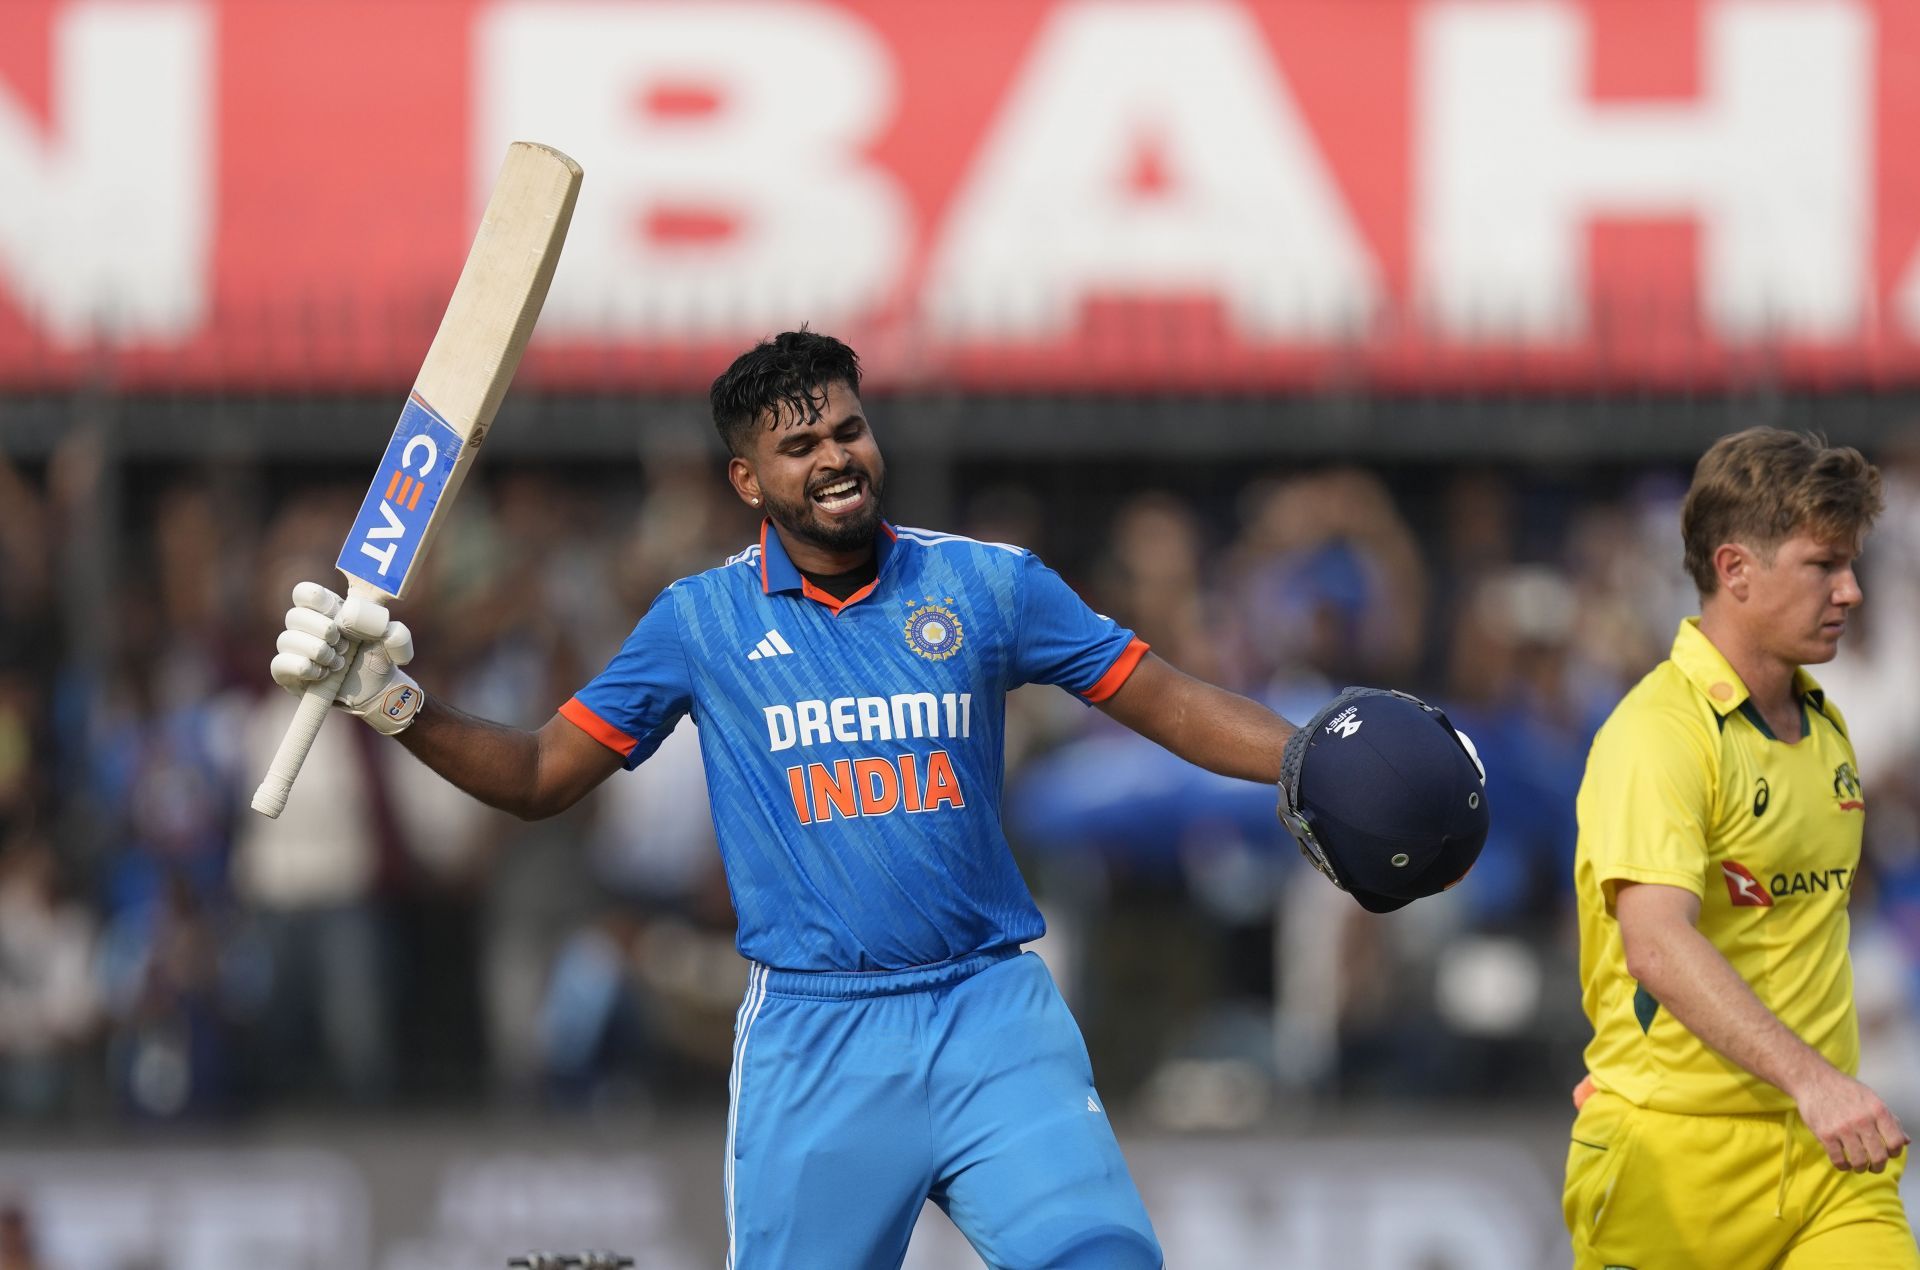 Shreyas Iyer&#039;s superb century ticked off another box for the Men in Blue